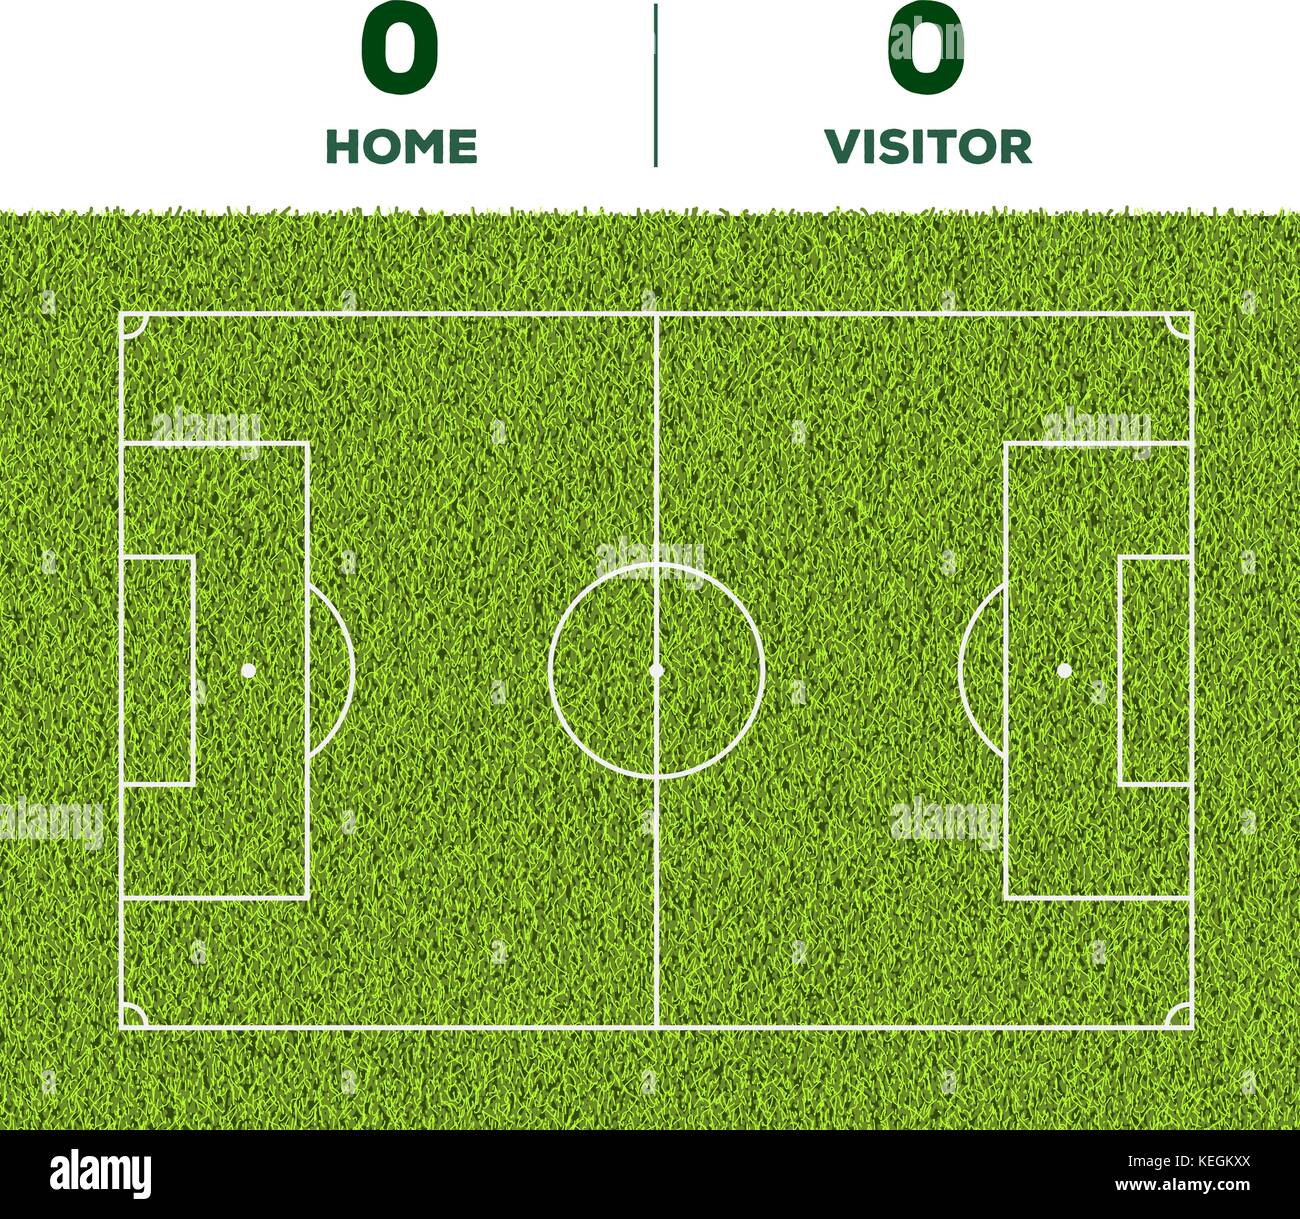 Outdoor Soccer line, game score display and green grass field background for the mockup Stock Vector